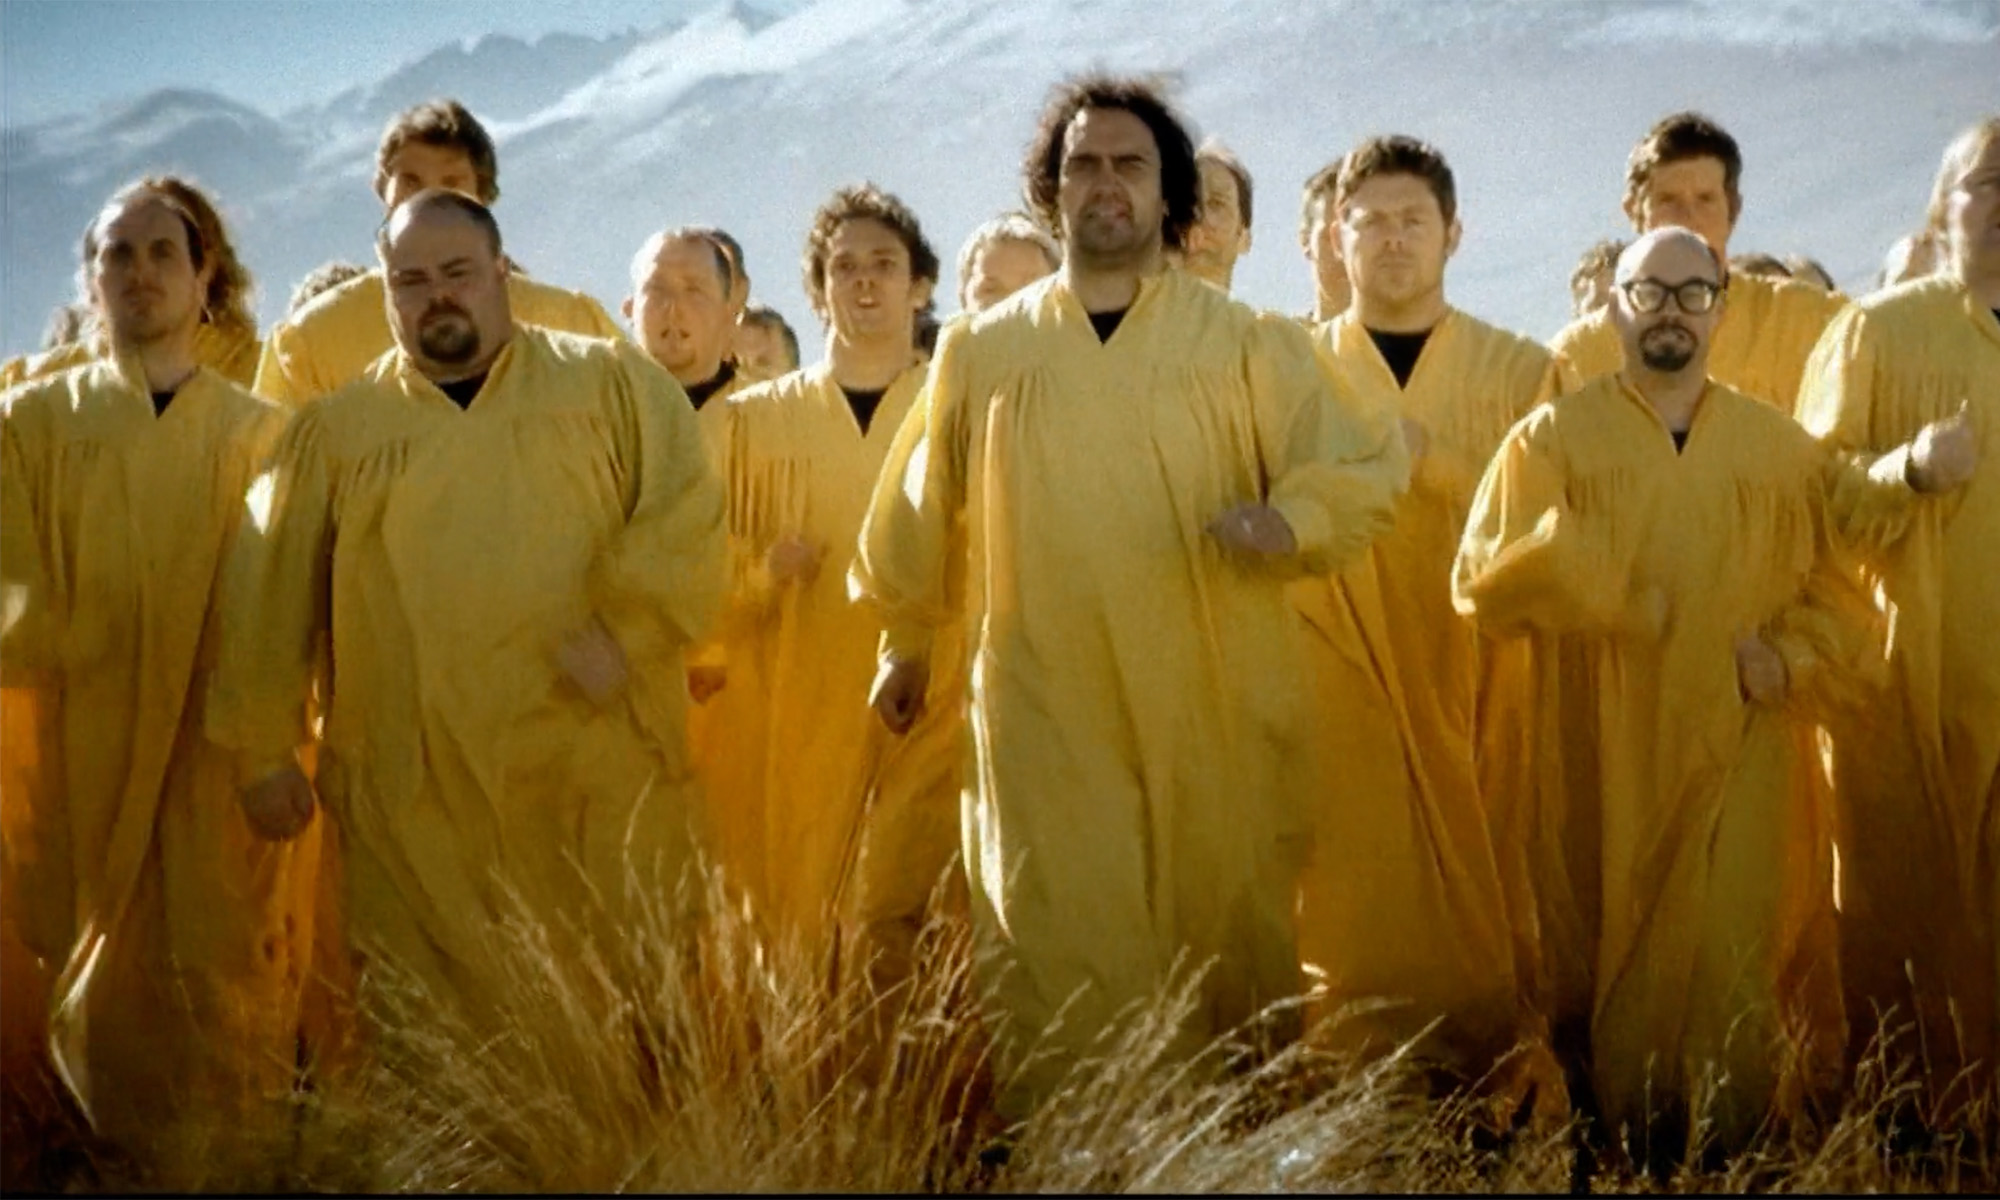 Carlton Draught Big Ad features many men in yellow kaftans